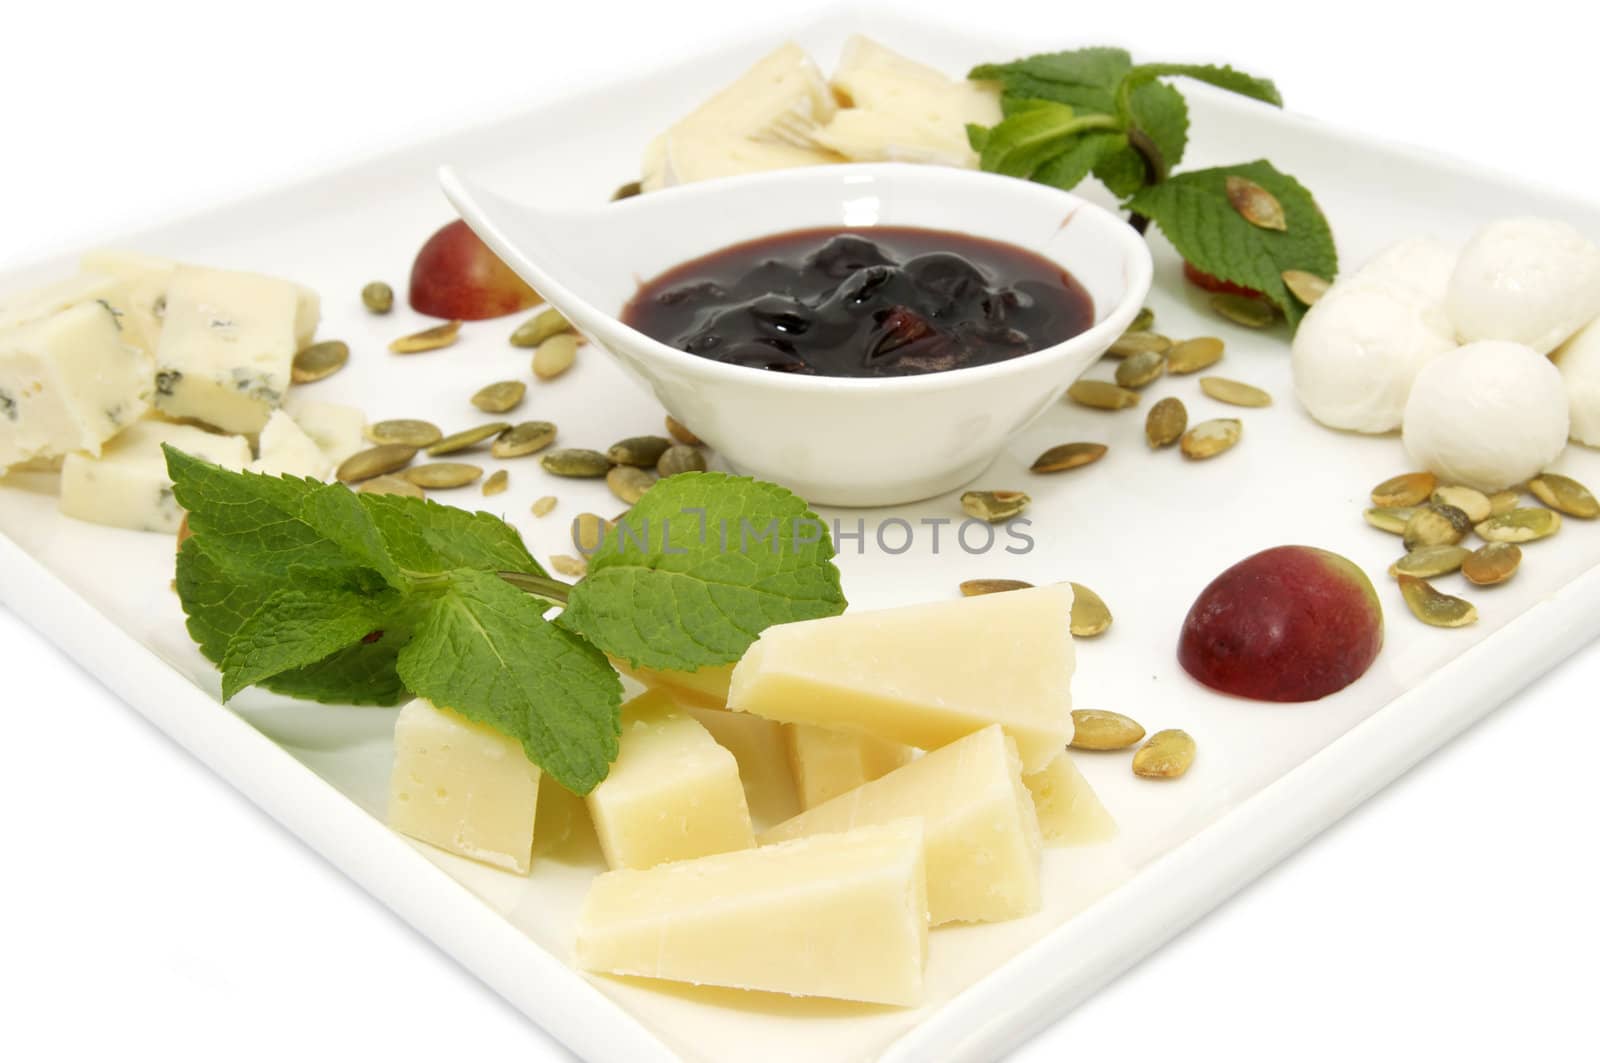 a plate of cheese decorated with berries and mint